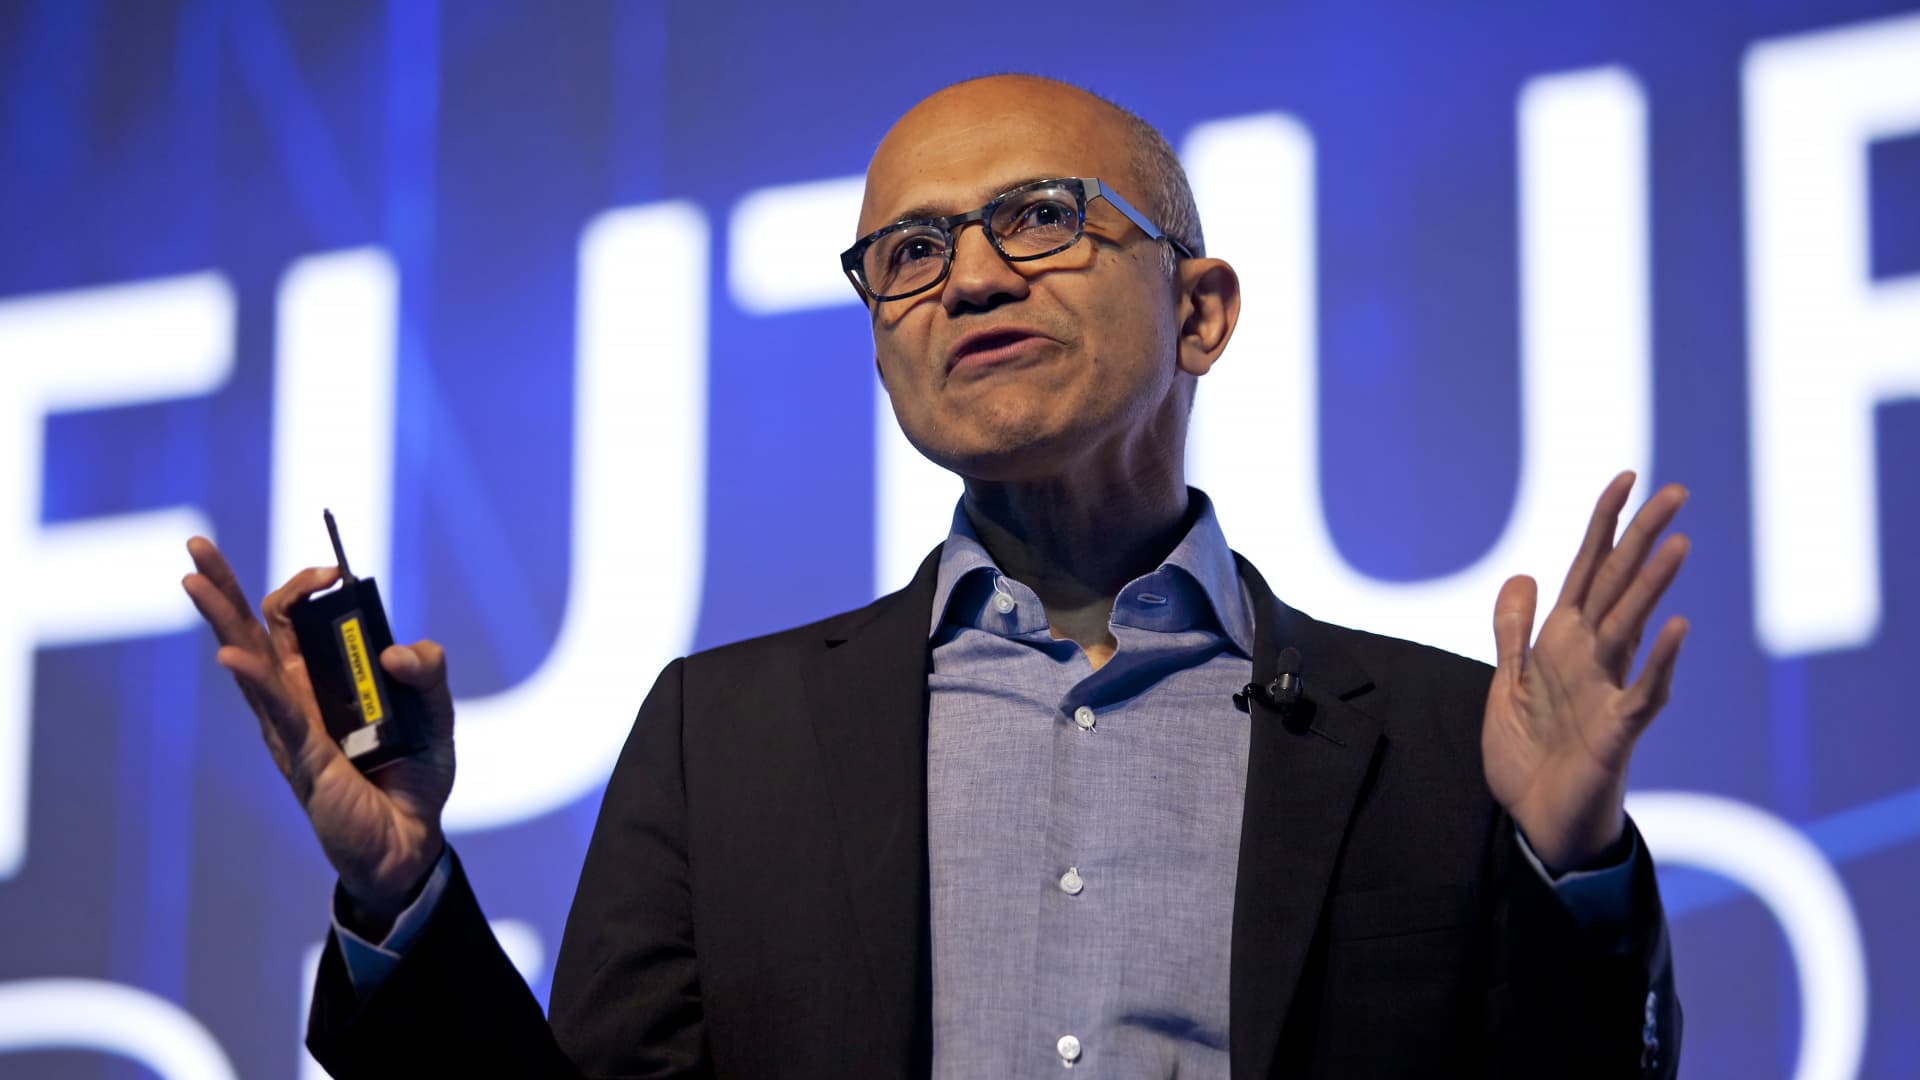 Microsoft discloses scale of Dynamics software in annual report